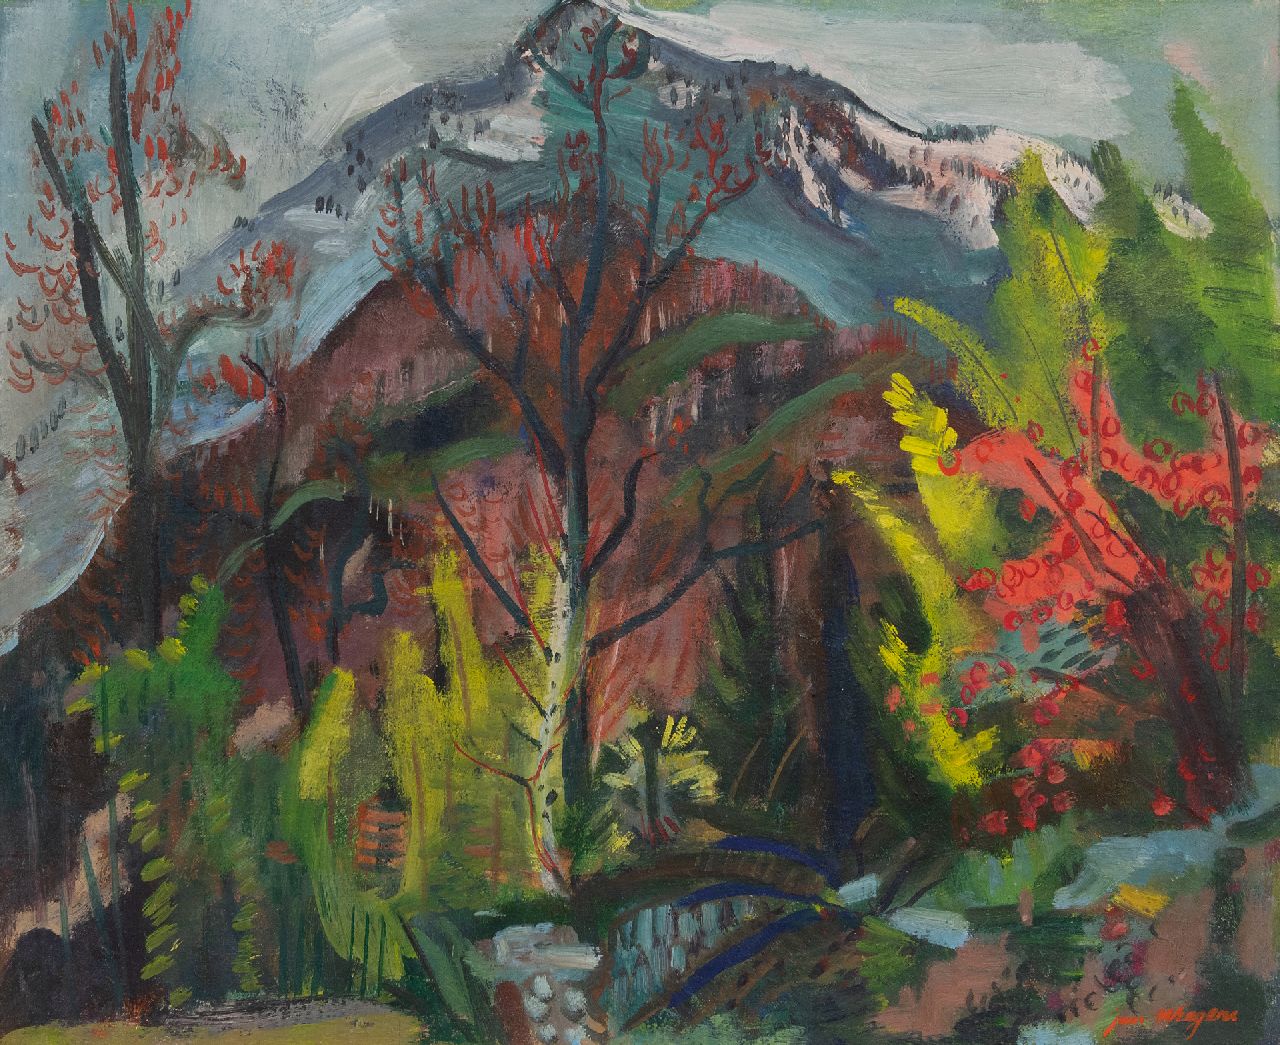 Wiegers J.  | Jan Wiegers, Garden in Ticino, wax paint on canvas 50.6 x 61.7 cm, signed l.r. and painted ca. 1947-1950